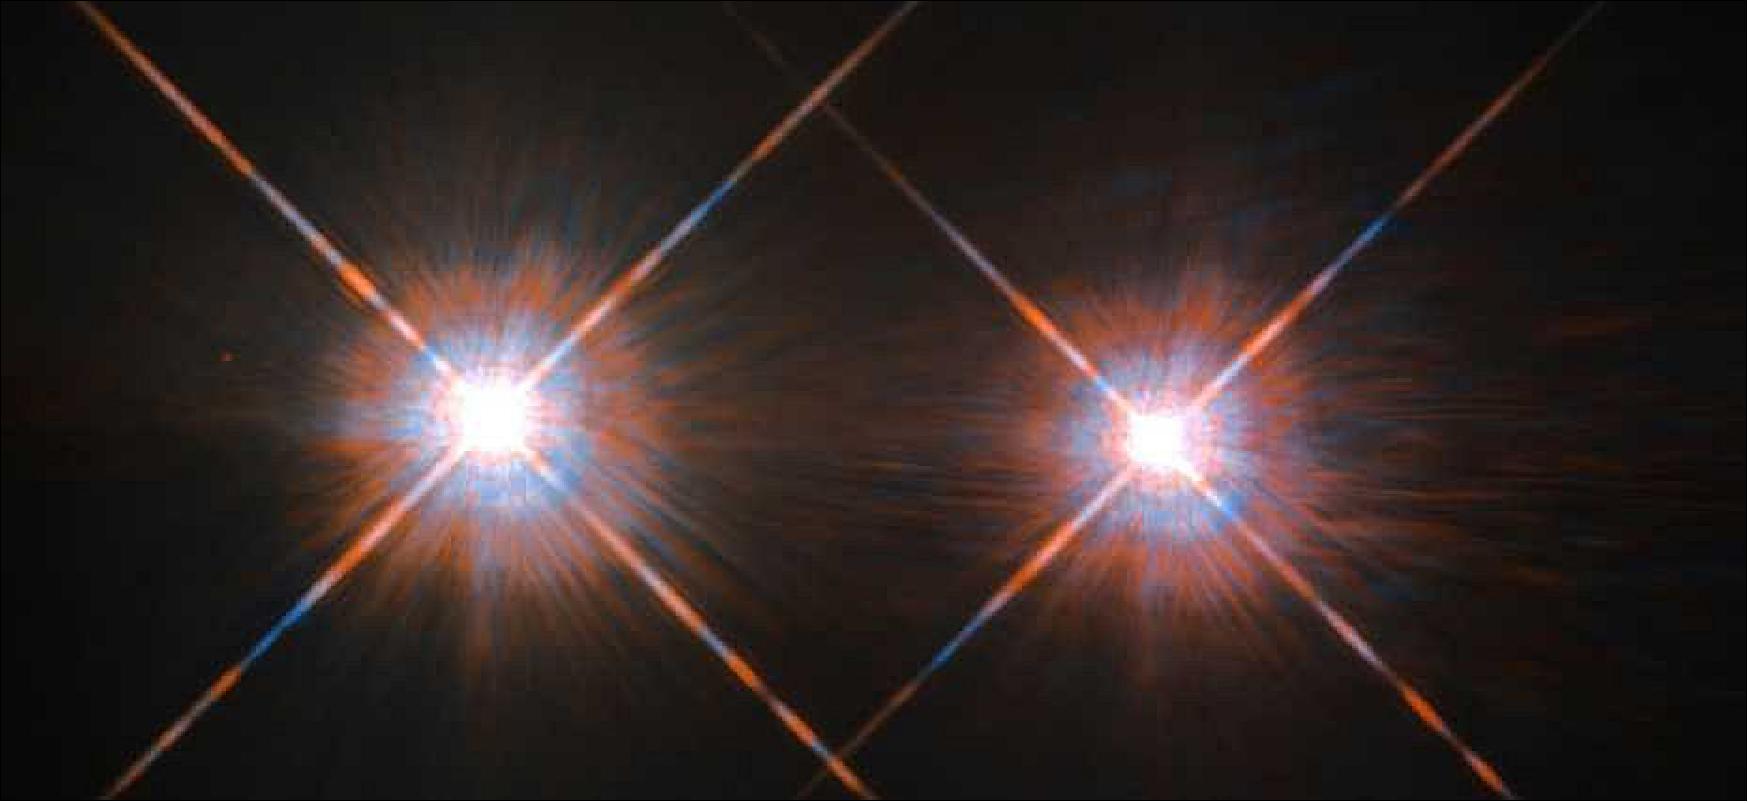 Figure 26: Alpha Centauri A (left) and Alpha Centauri B are located in the constellation of Centaurus (The Centaur), at a distance of 4.3 light-years. The star pair orbits a common center of gravity once every 80 years (image credit: NASA/ESA/Hubble)